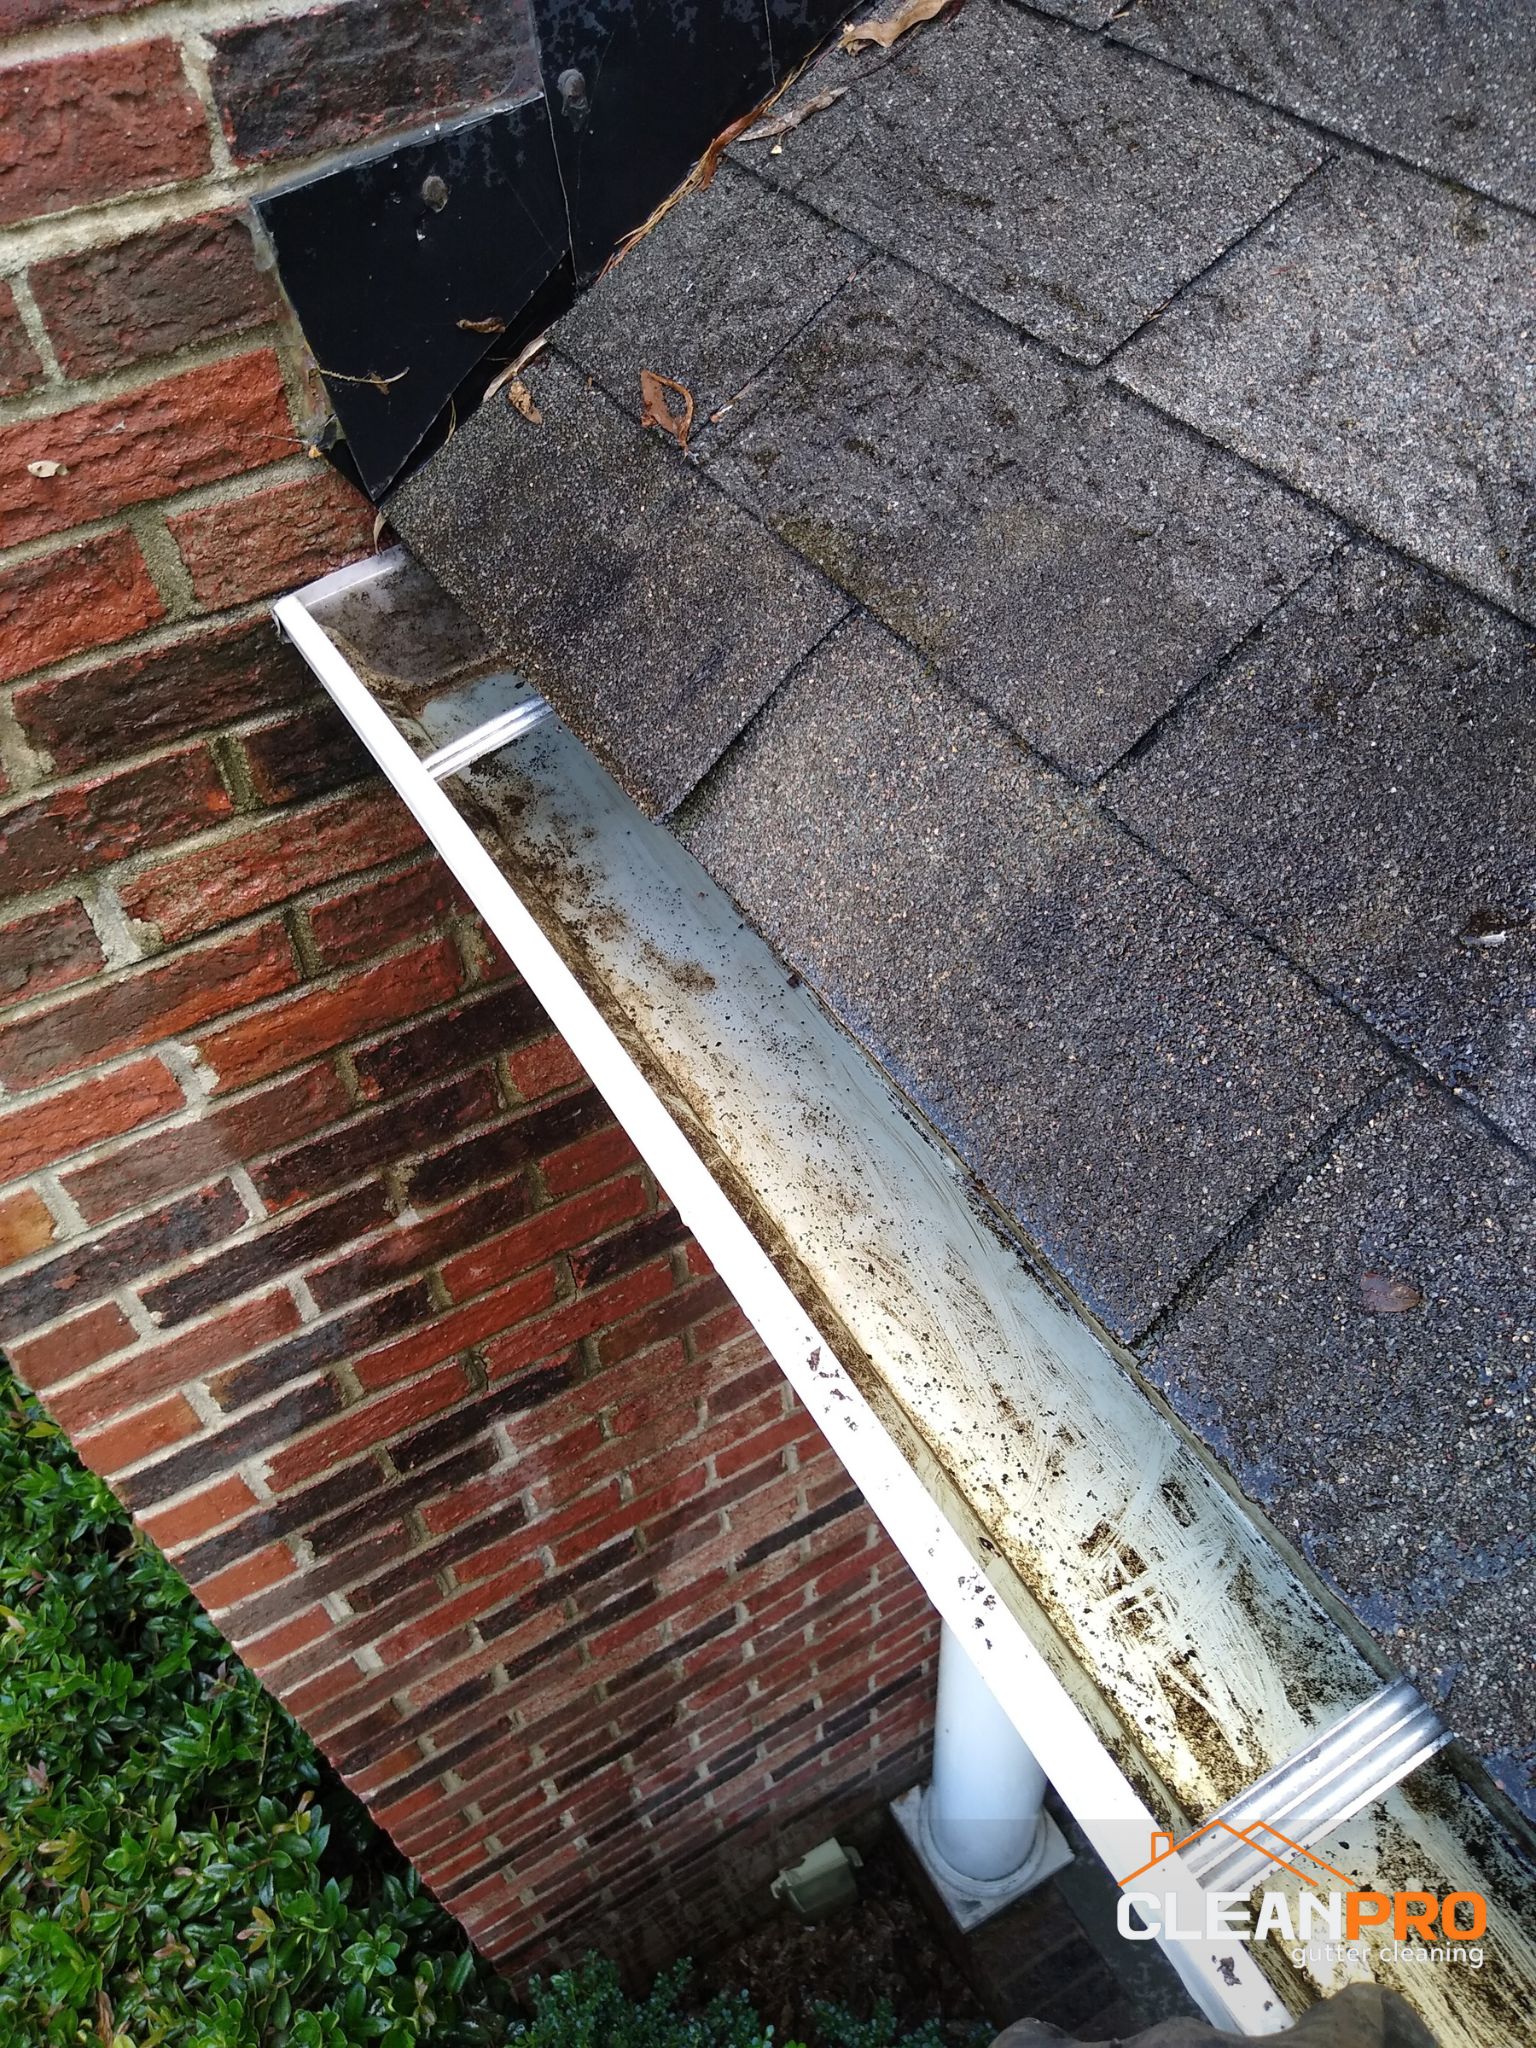 Professional Tulsa Gutter Cleaners